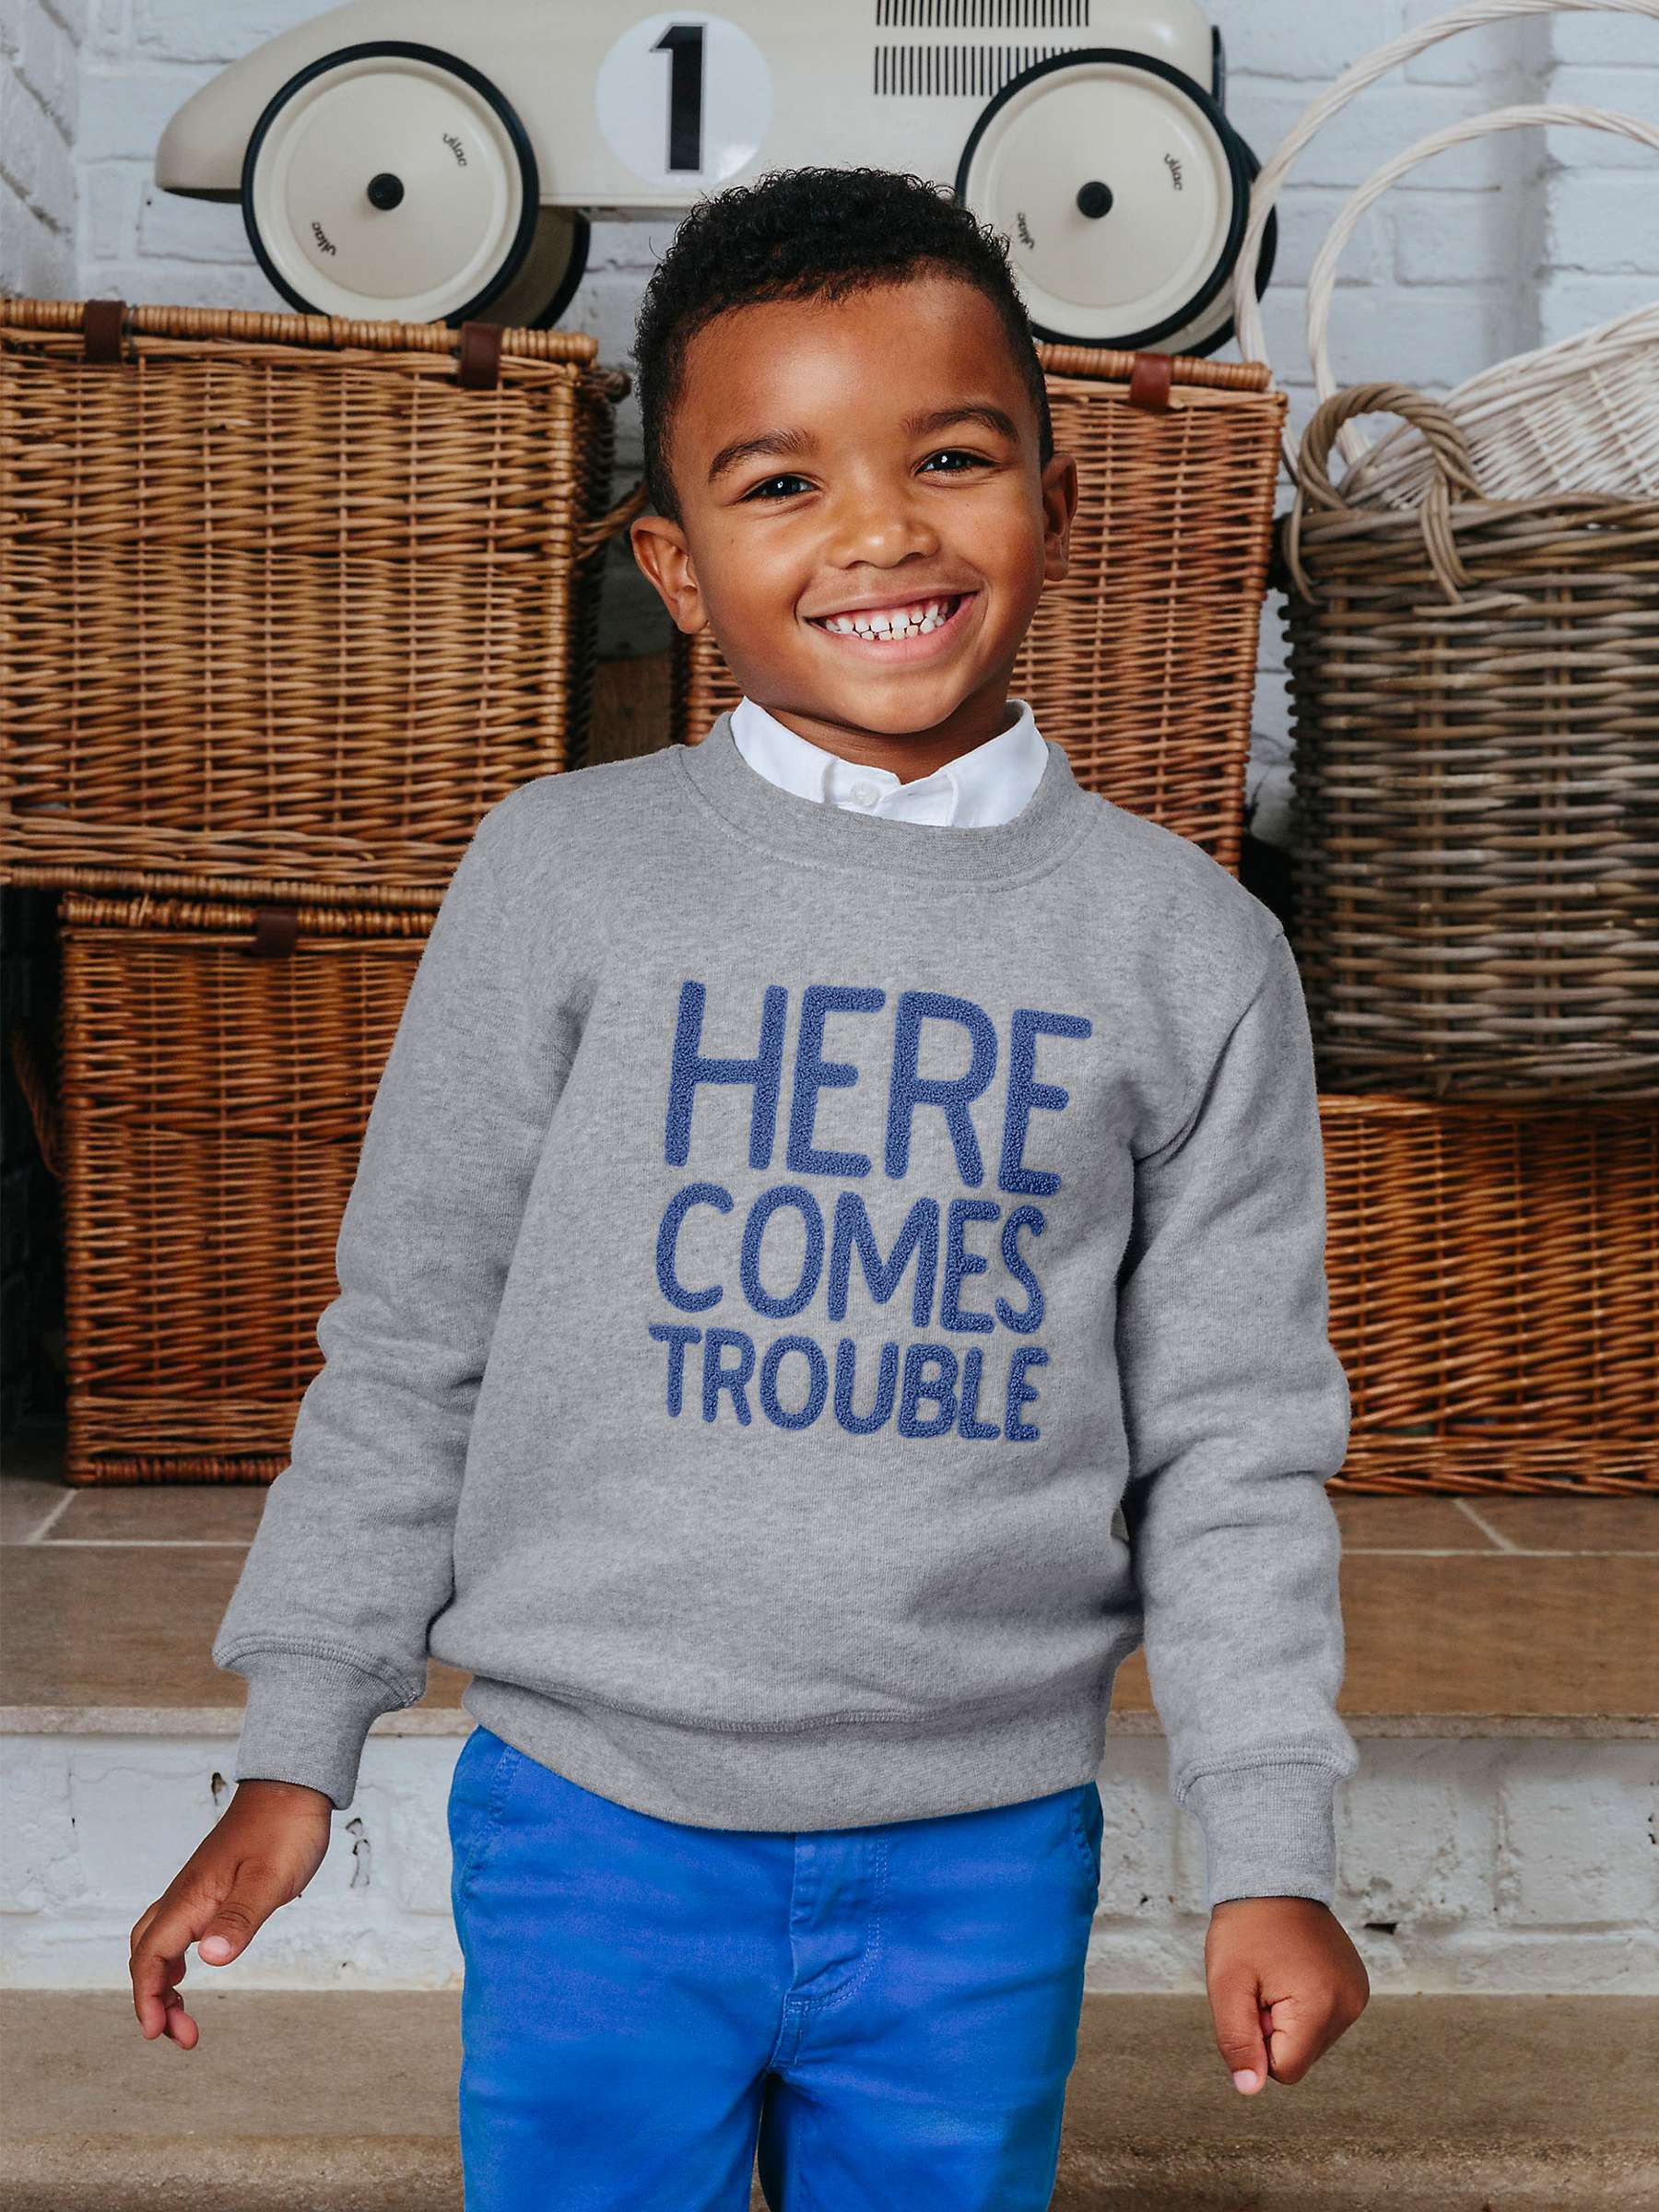 Buy Trotters Kids' Here Comes Trouble Jumper, Grey Marl Online at johnlewis.com